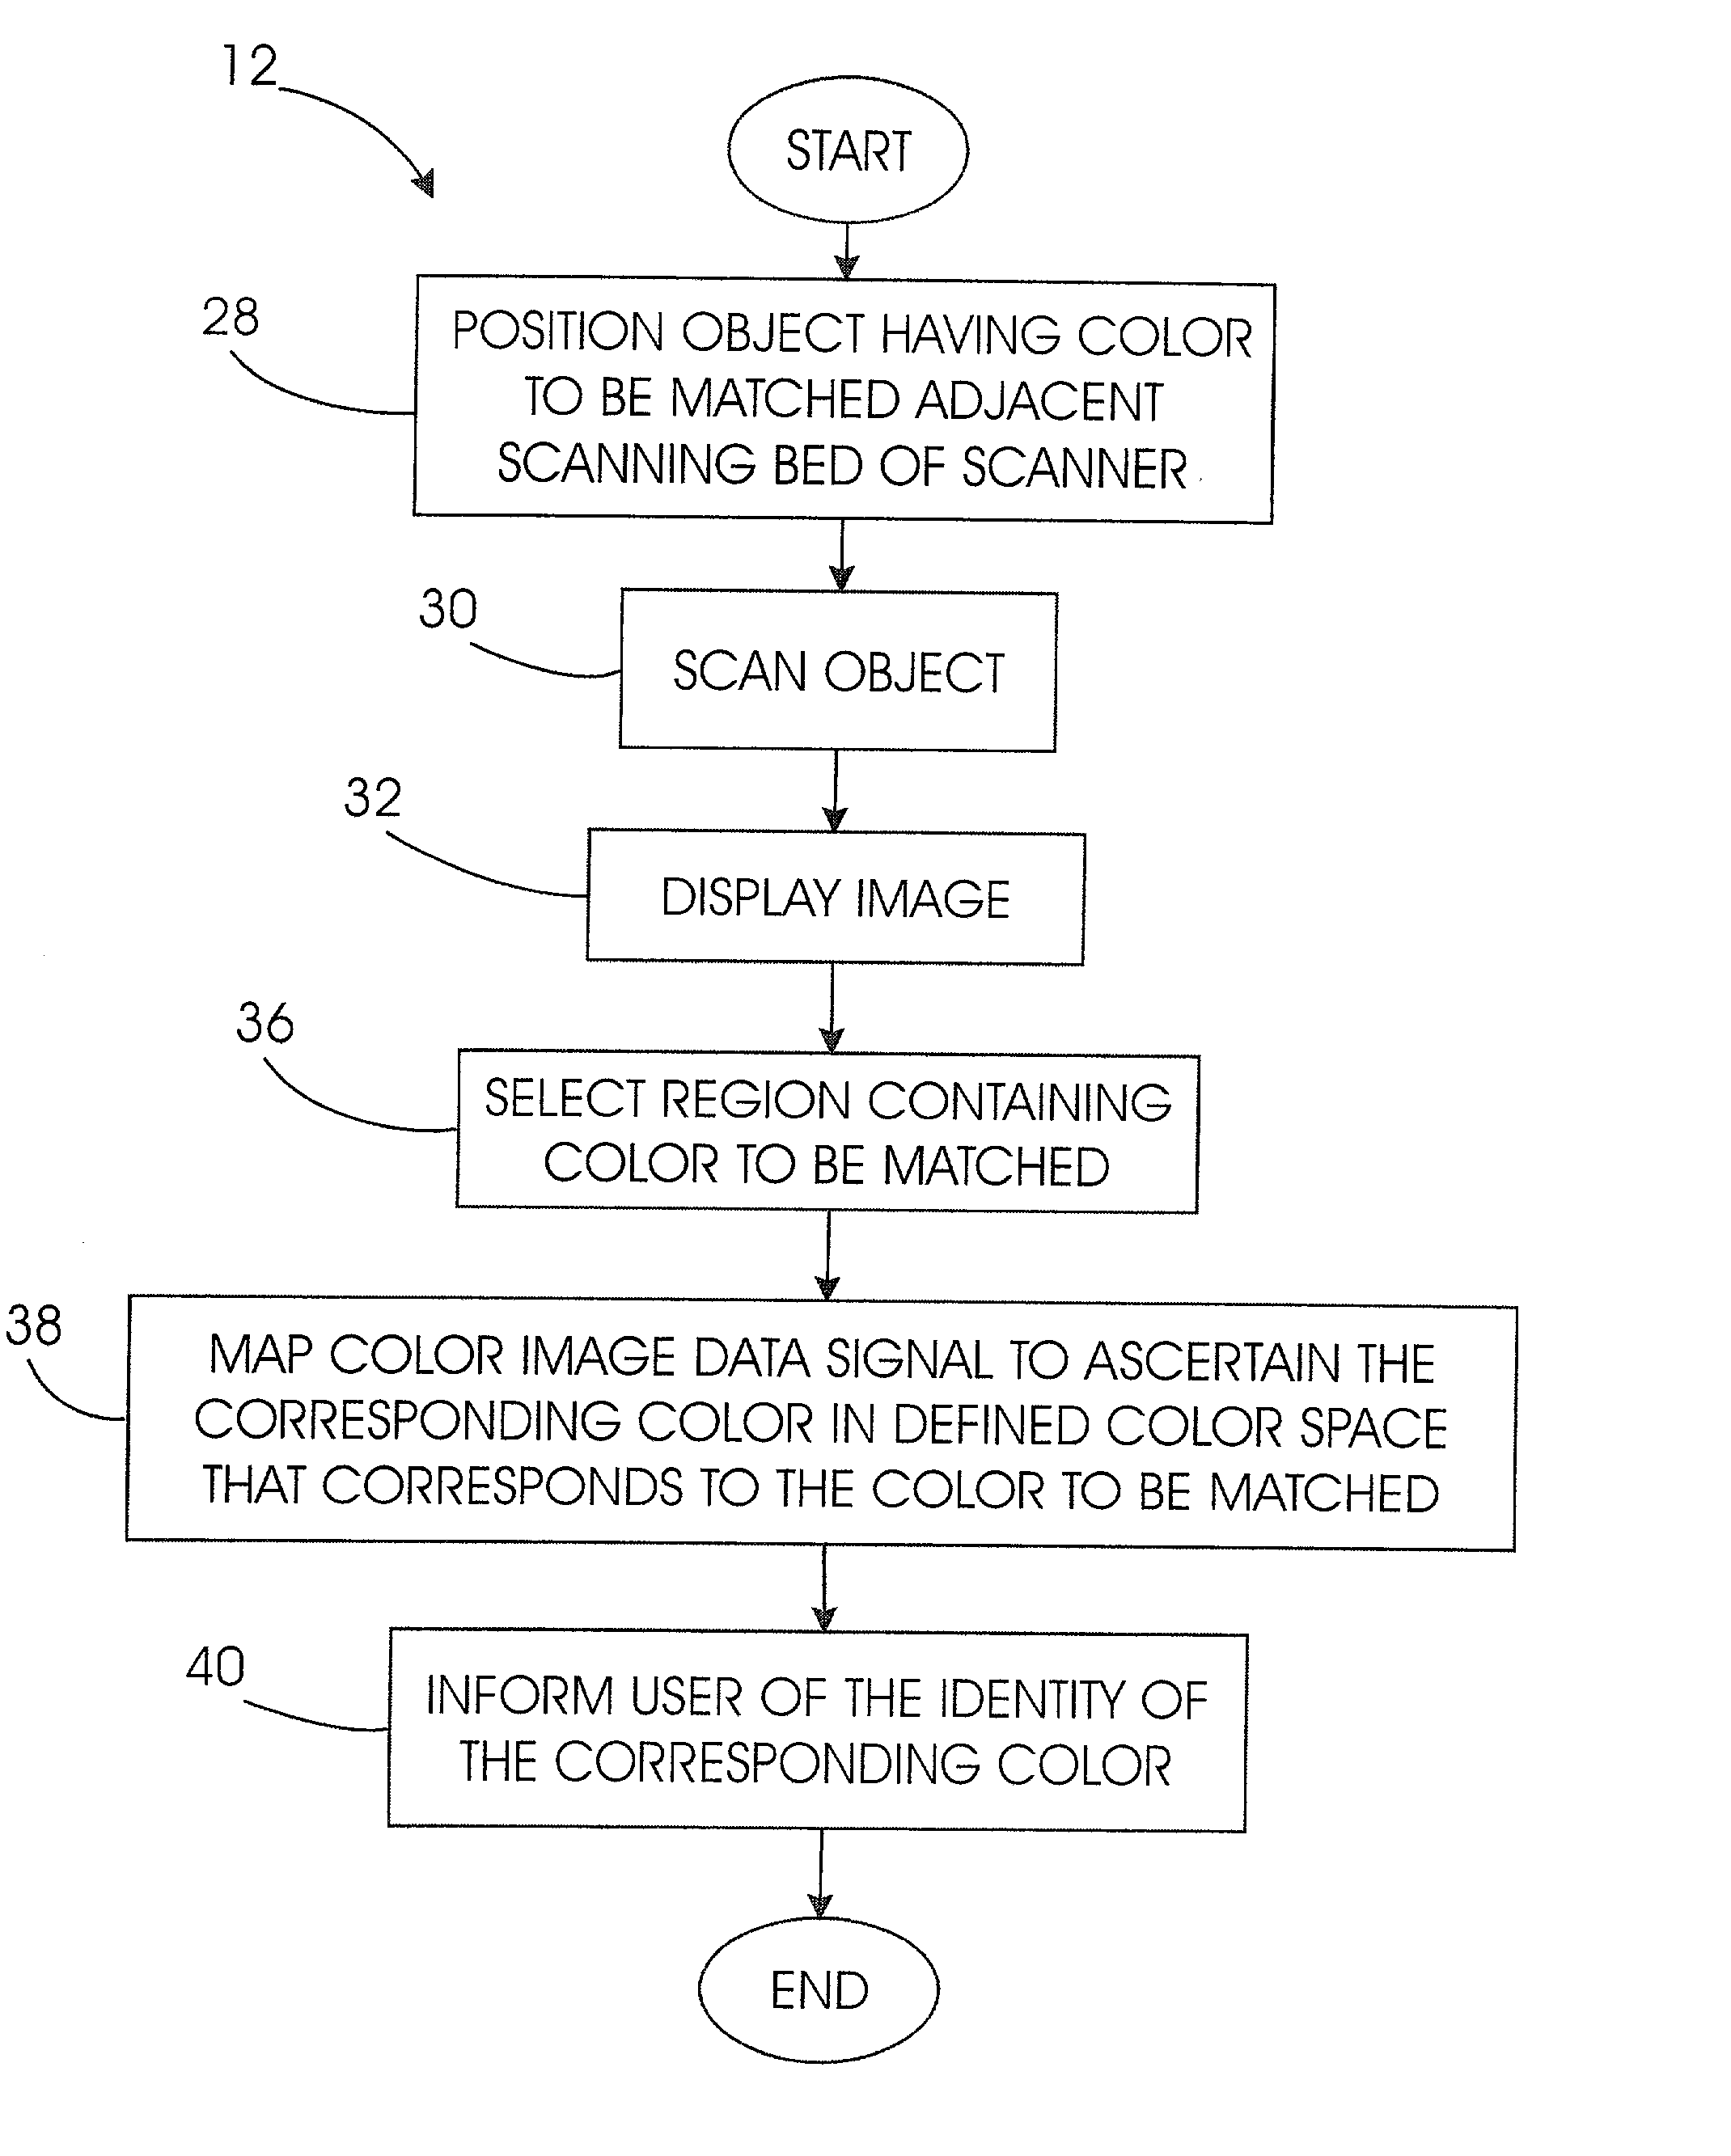 Method and apparatus for matching color image data with a corresponding color in a defined color space